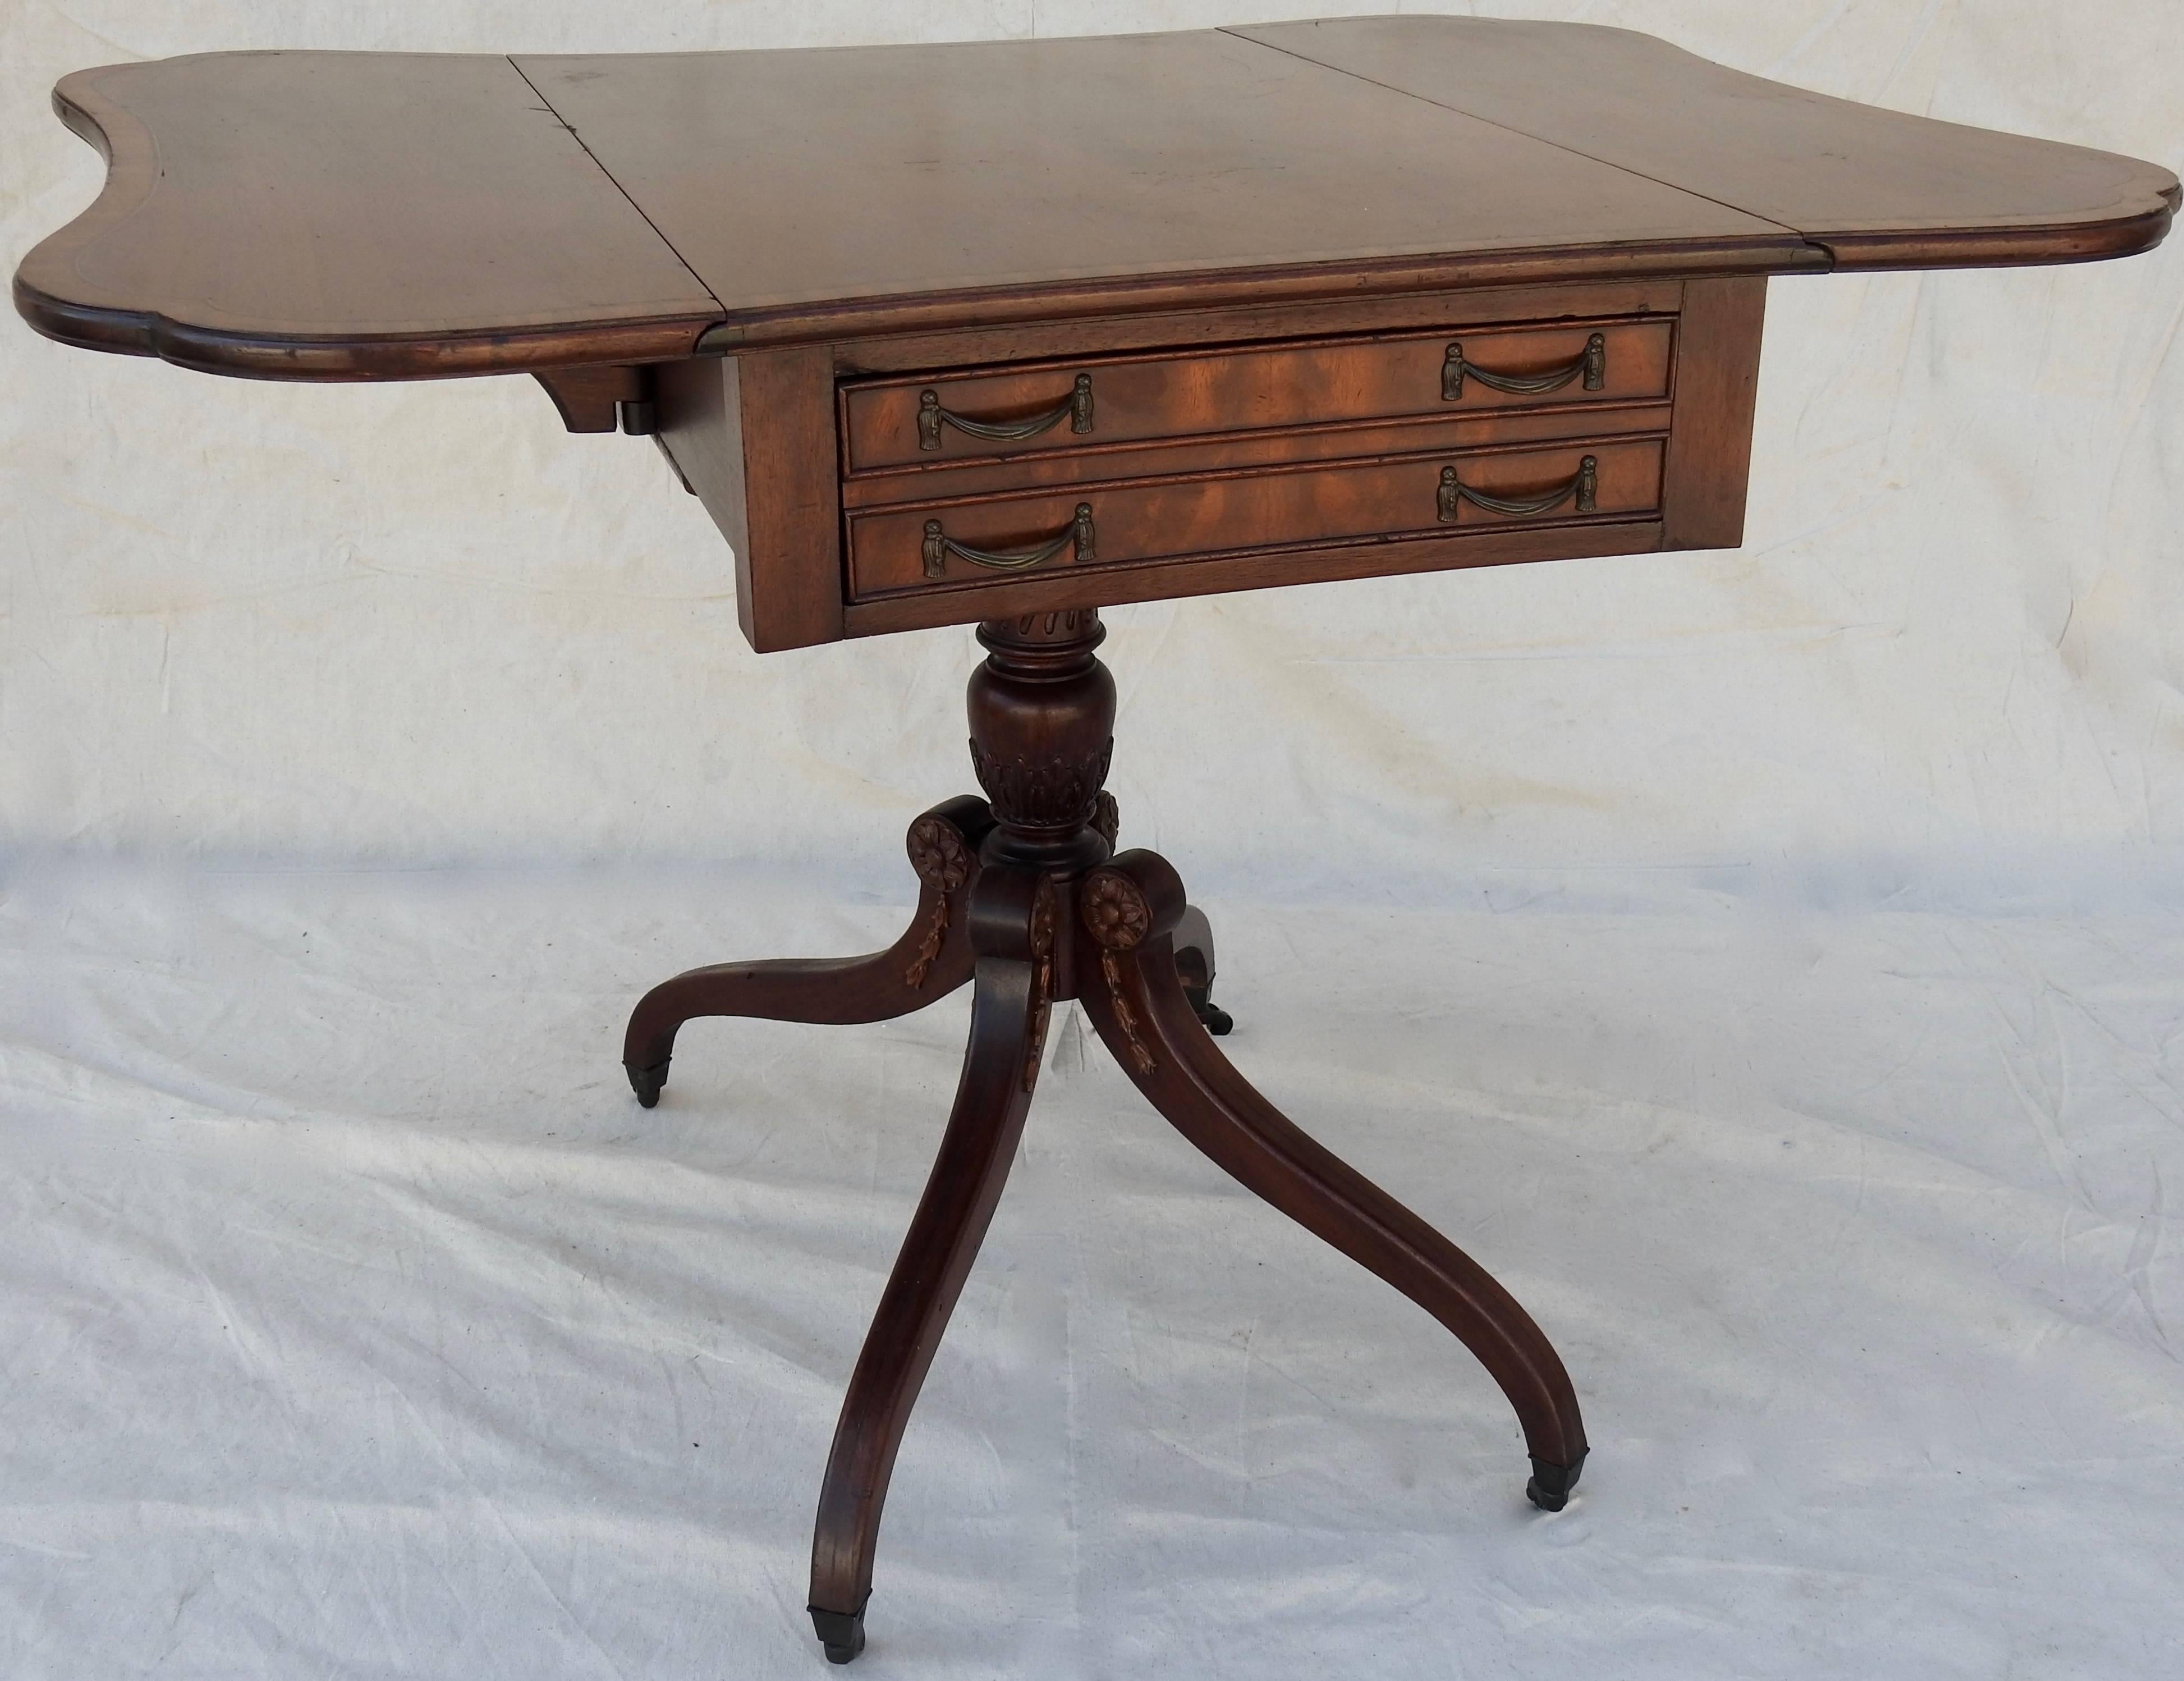 We are offering a unique butterfly shaped drop-leaf table. It is made of walnut with the edges trimmed with inlay. The one drawer is enhanced with cast bronze pulls with tassels. The table sits atop a swirled column with four curved legs that extend